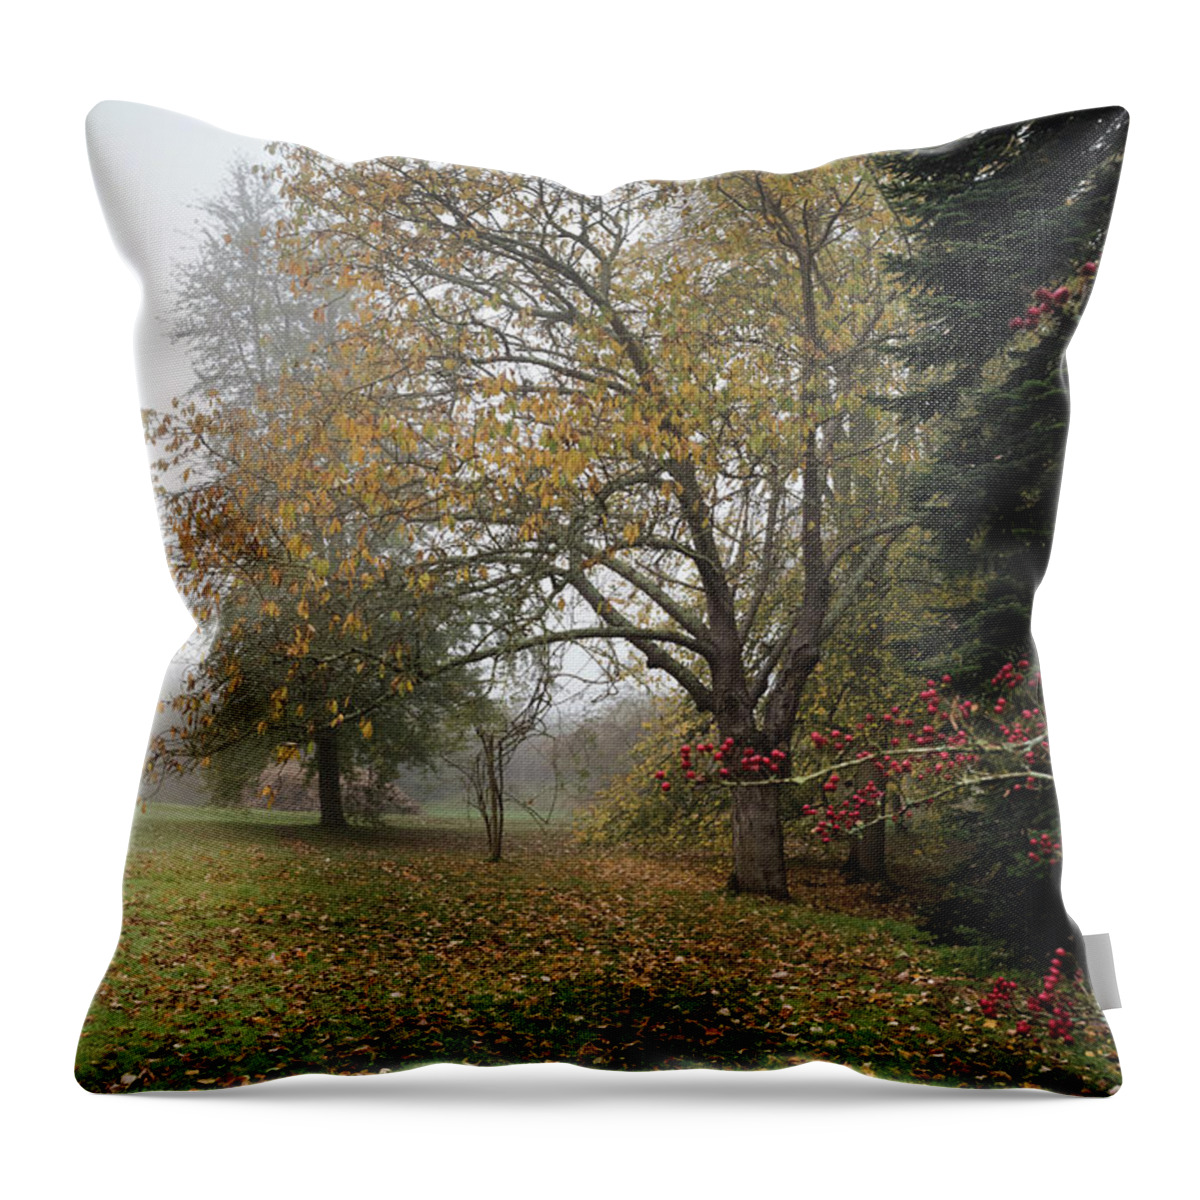 Red Berries Throw Pillow featuring the photograph Autumn Mist, Great Dixter Garden 2 by Perry Rodriguez